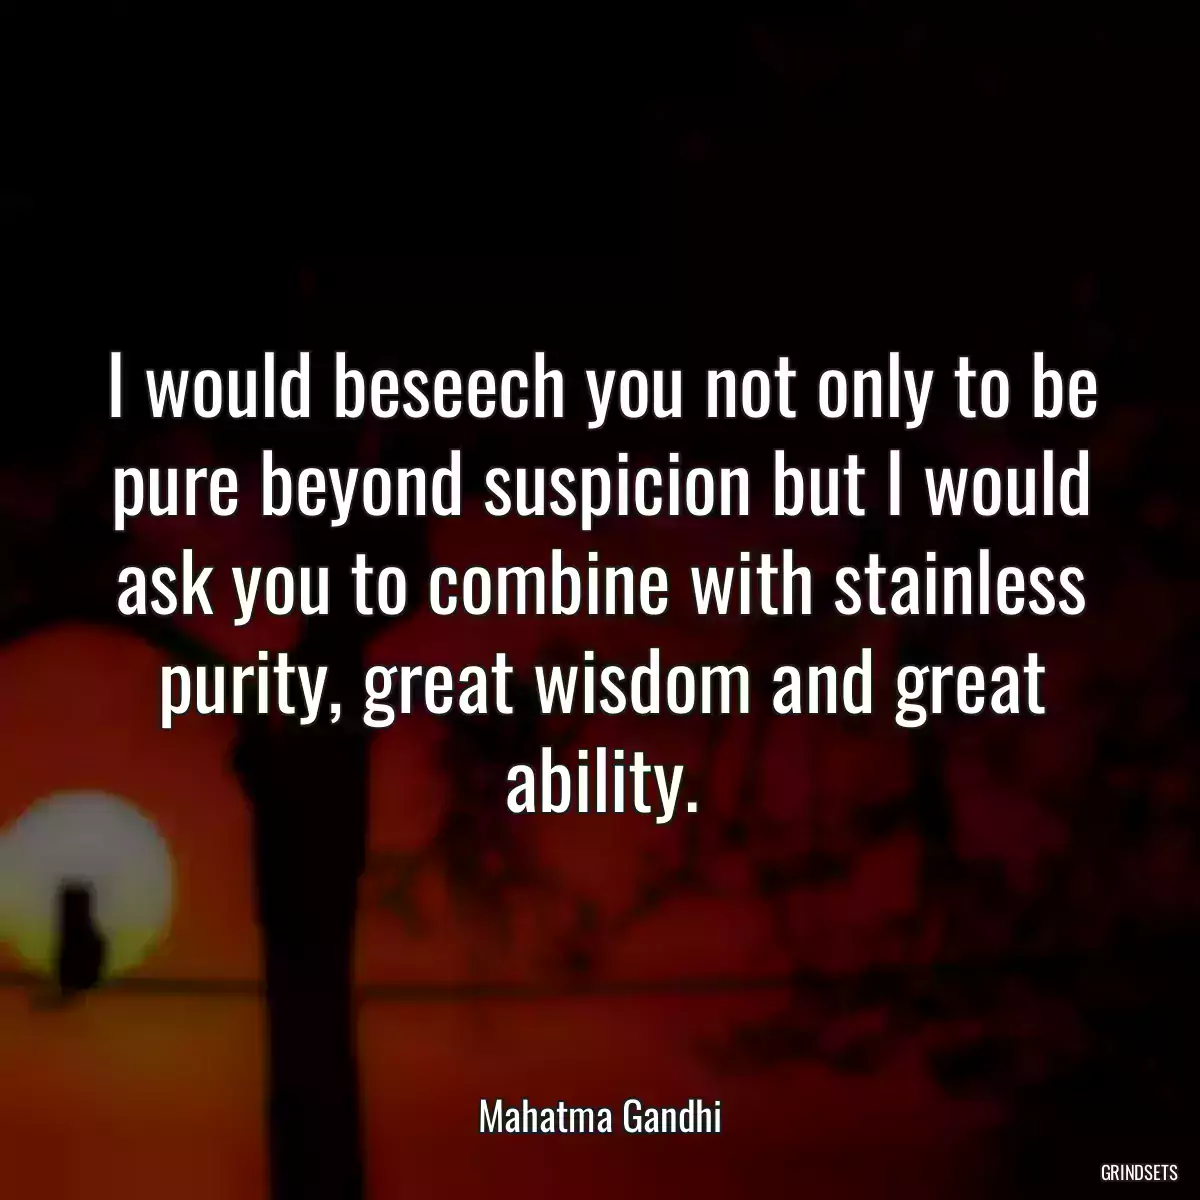 I would beseech you not only to be pure beyond suspicion but I would ask you to combine with stainless purity, great wisdom and great ability.